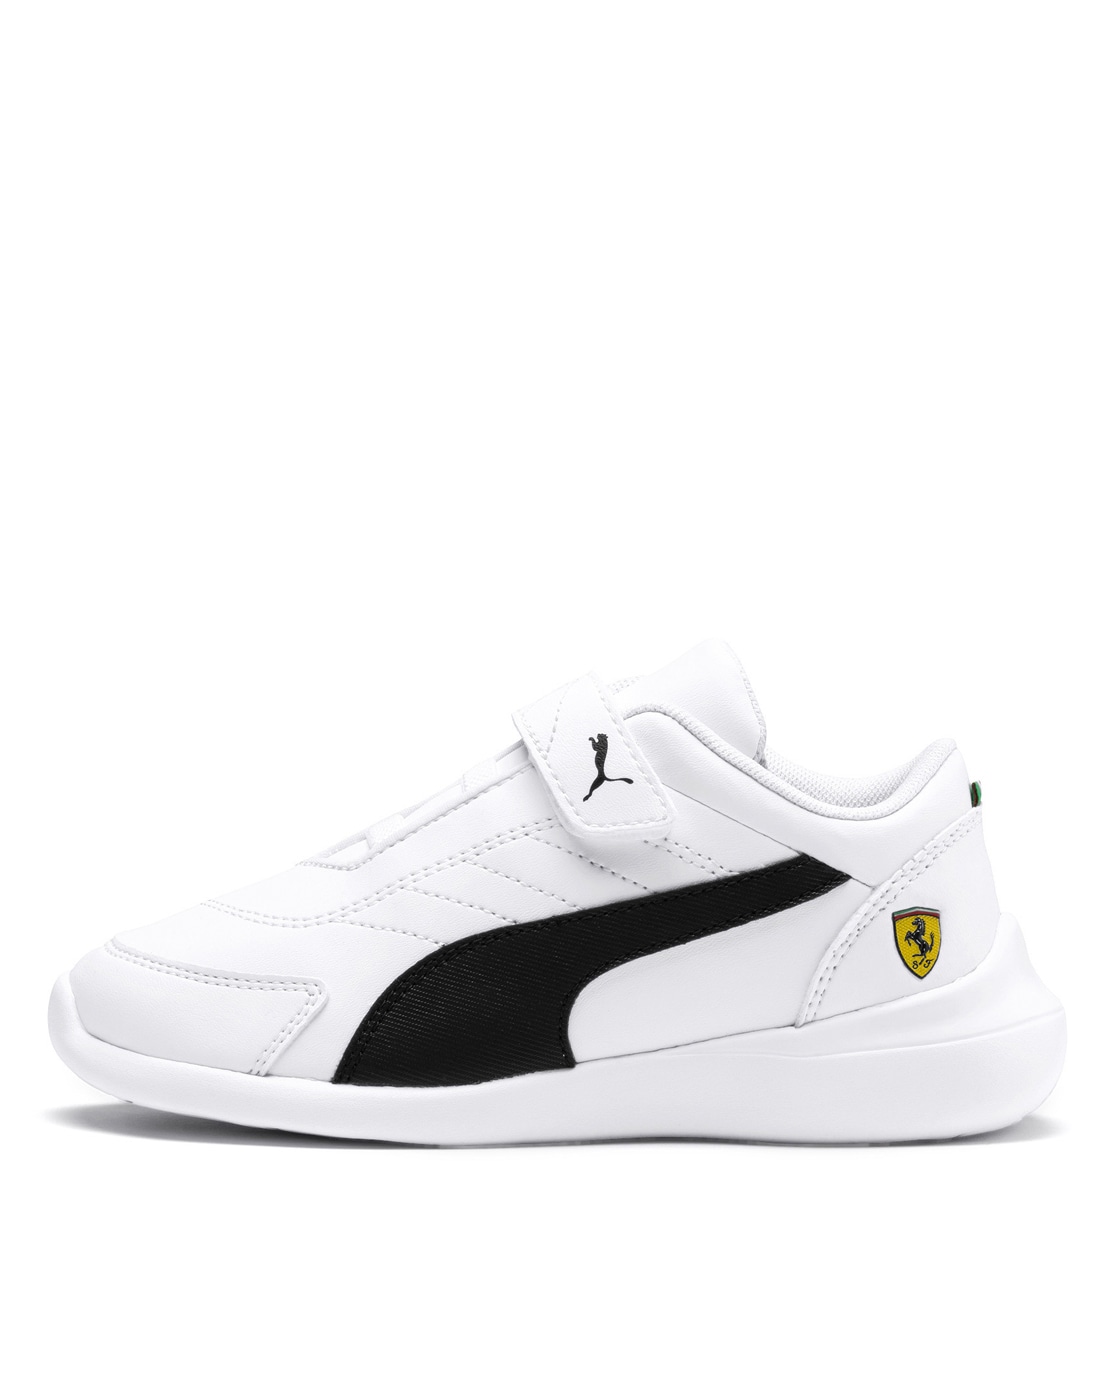 white sneakers under 2000